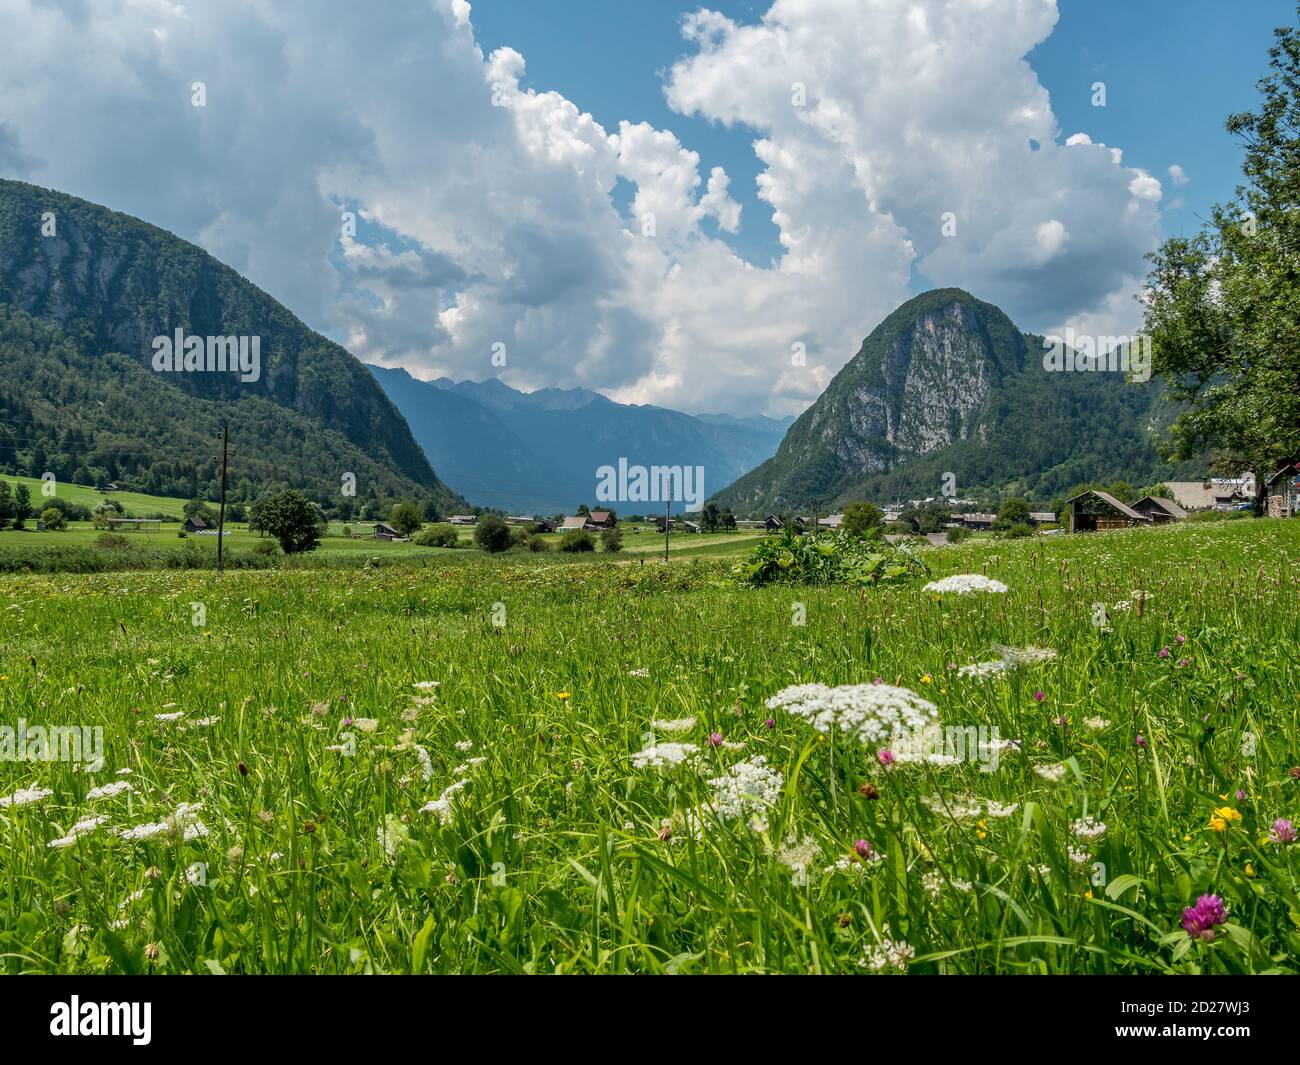 Alpine landscape with green meadow, flowers and cloudy sky around slovenian mountains Stock Photo